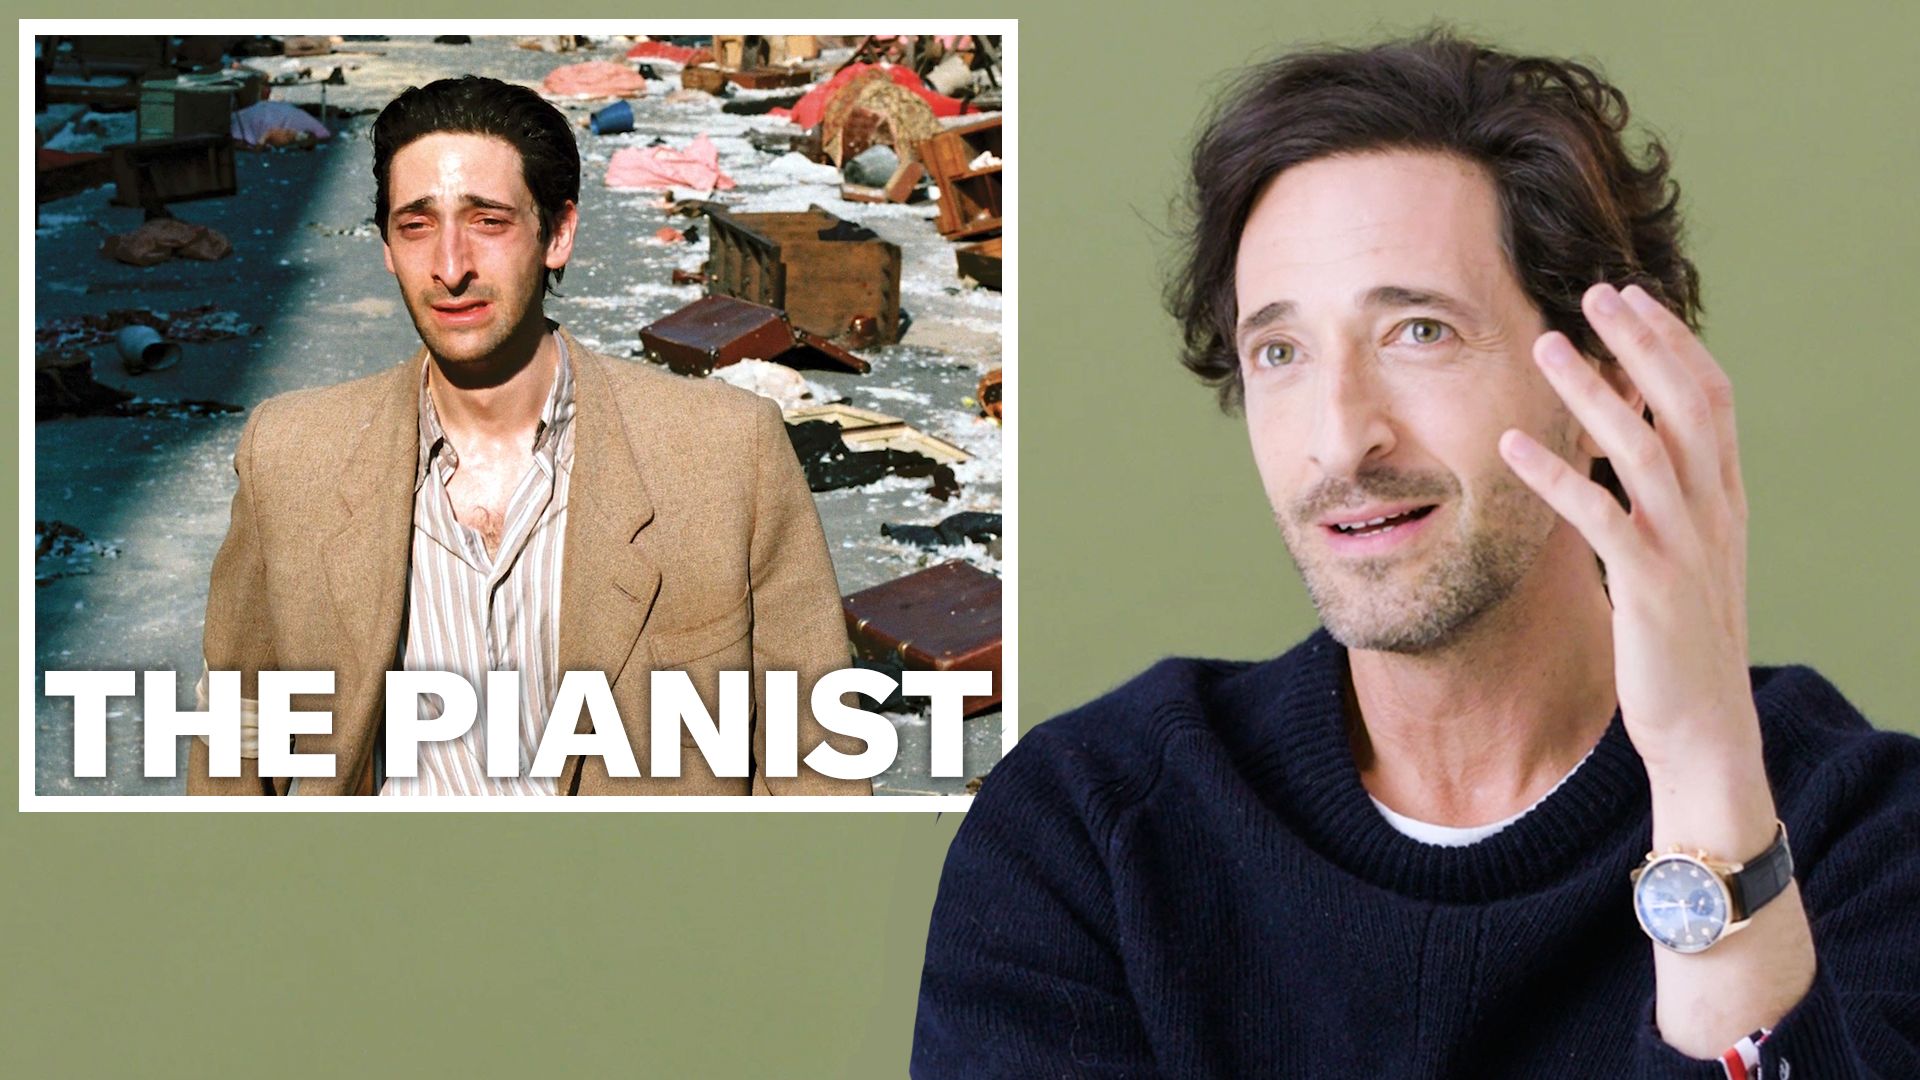 Watch Adrien Brody Breaks Down His Most Iconic Characters Iconic Characters GQ photo image